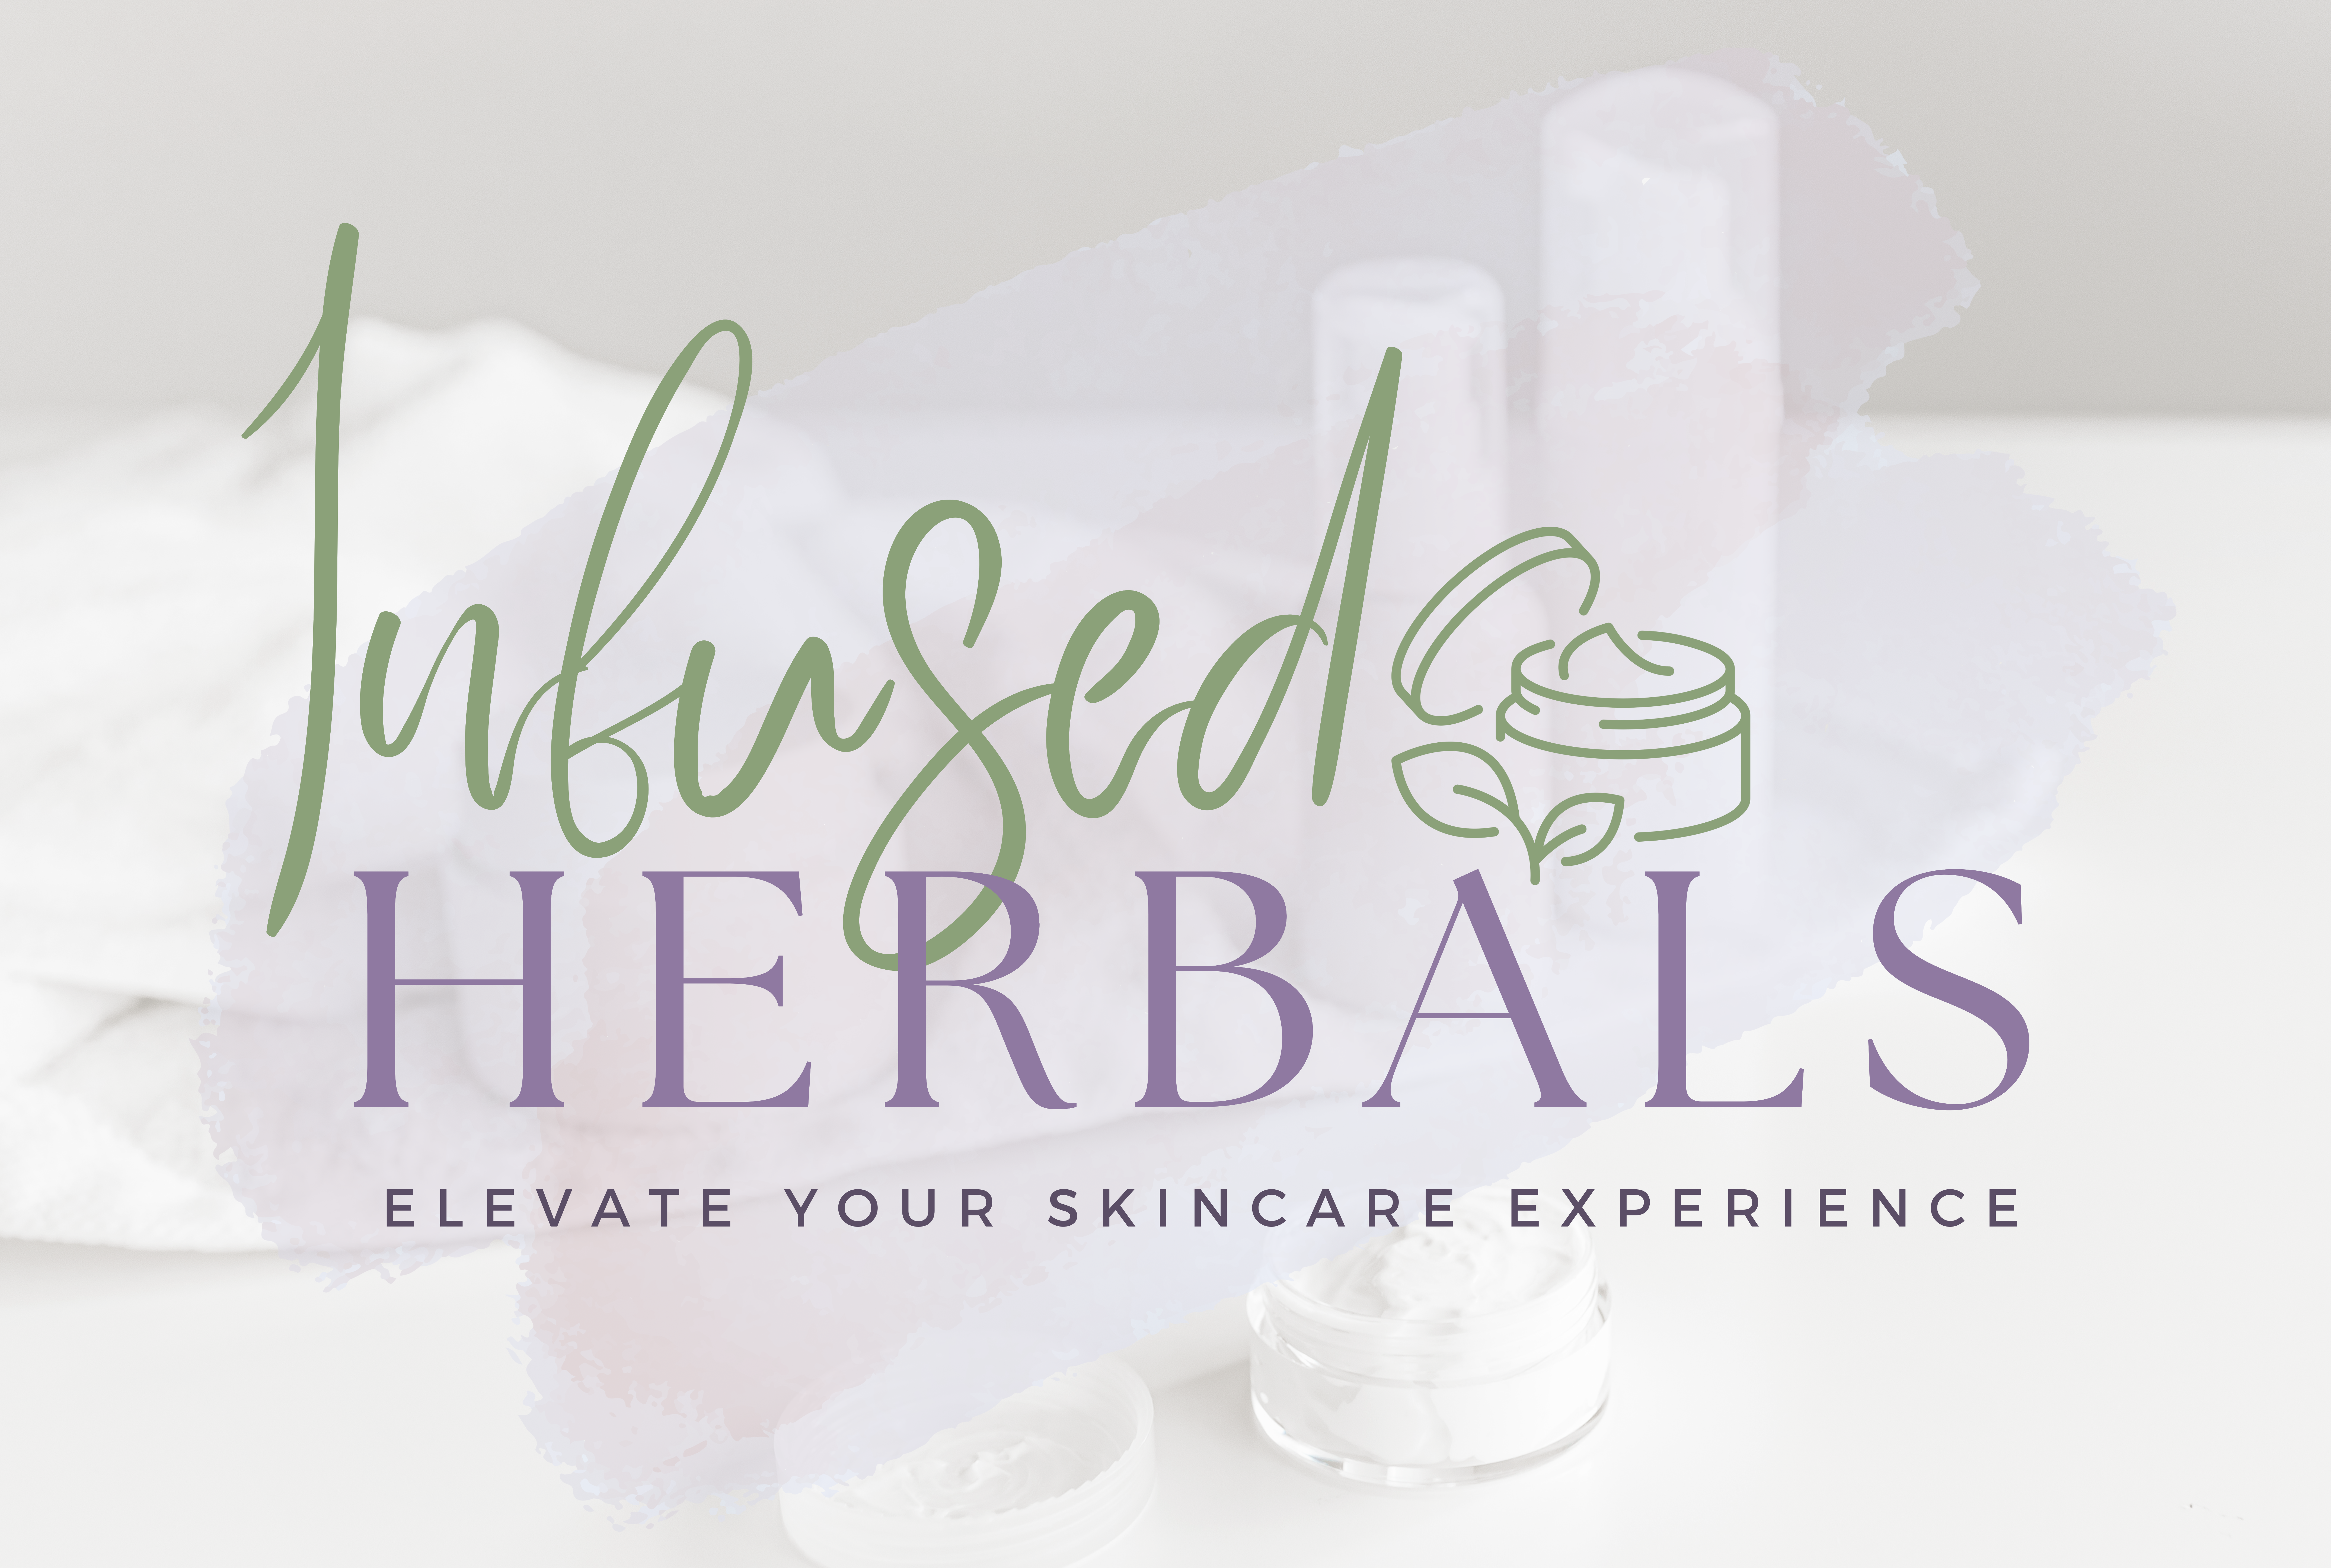 Infused Herbals is a homemade skincare company based in New Jersey.